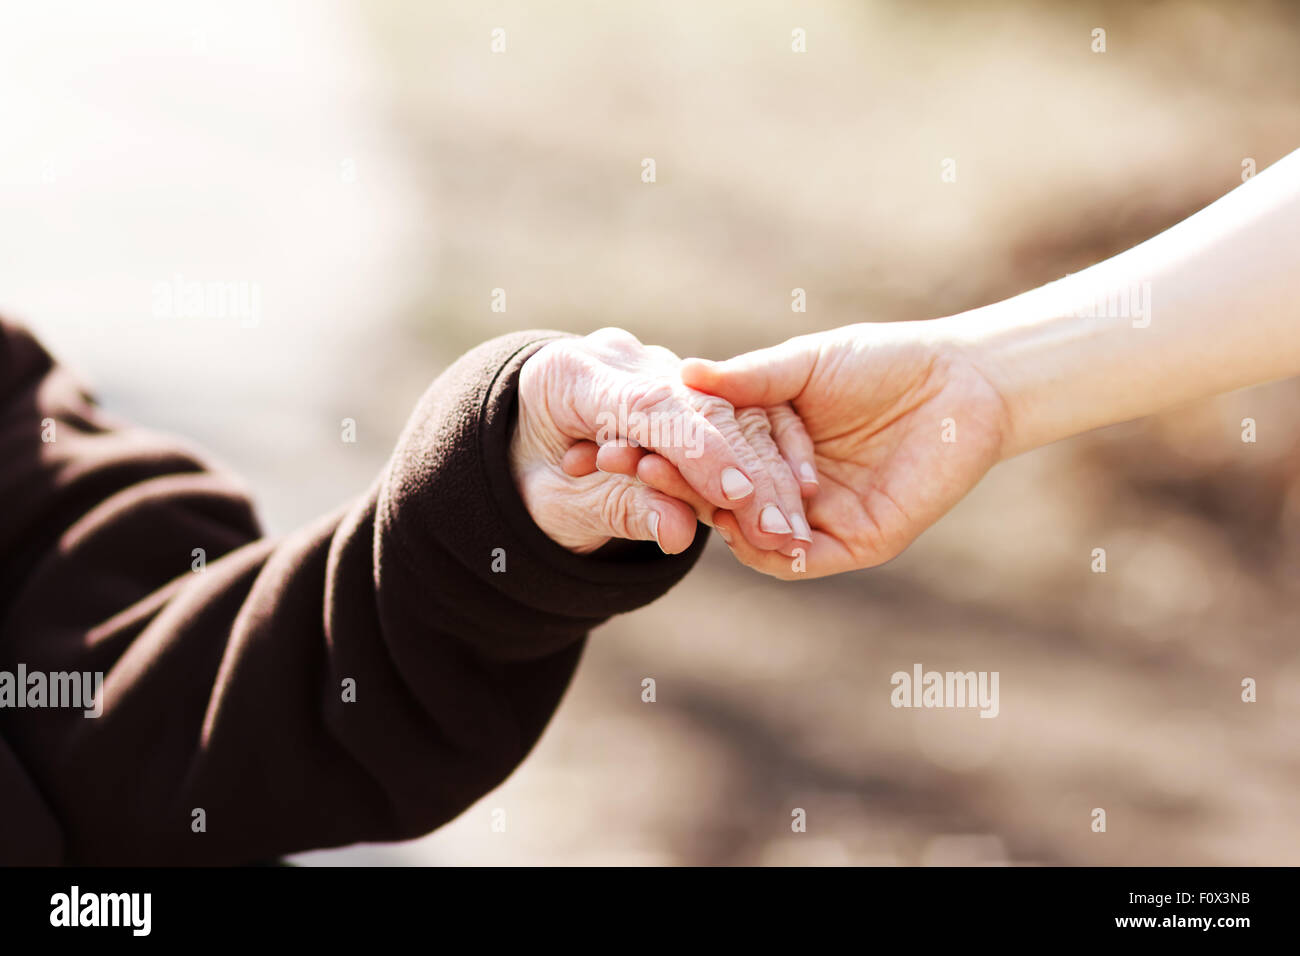 Elderly woman holding hands with young caretaker Stock Photo